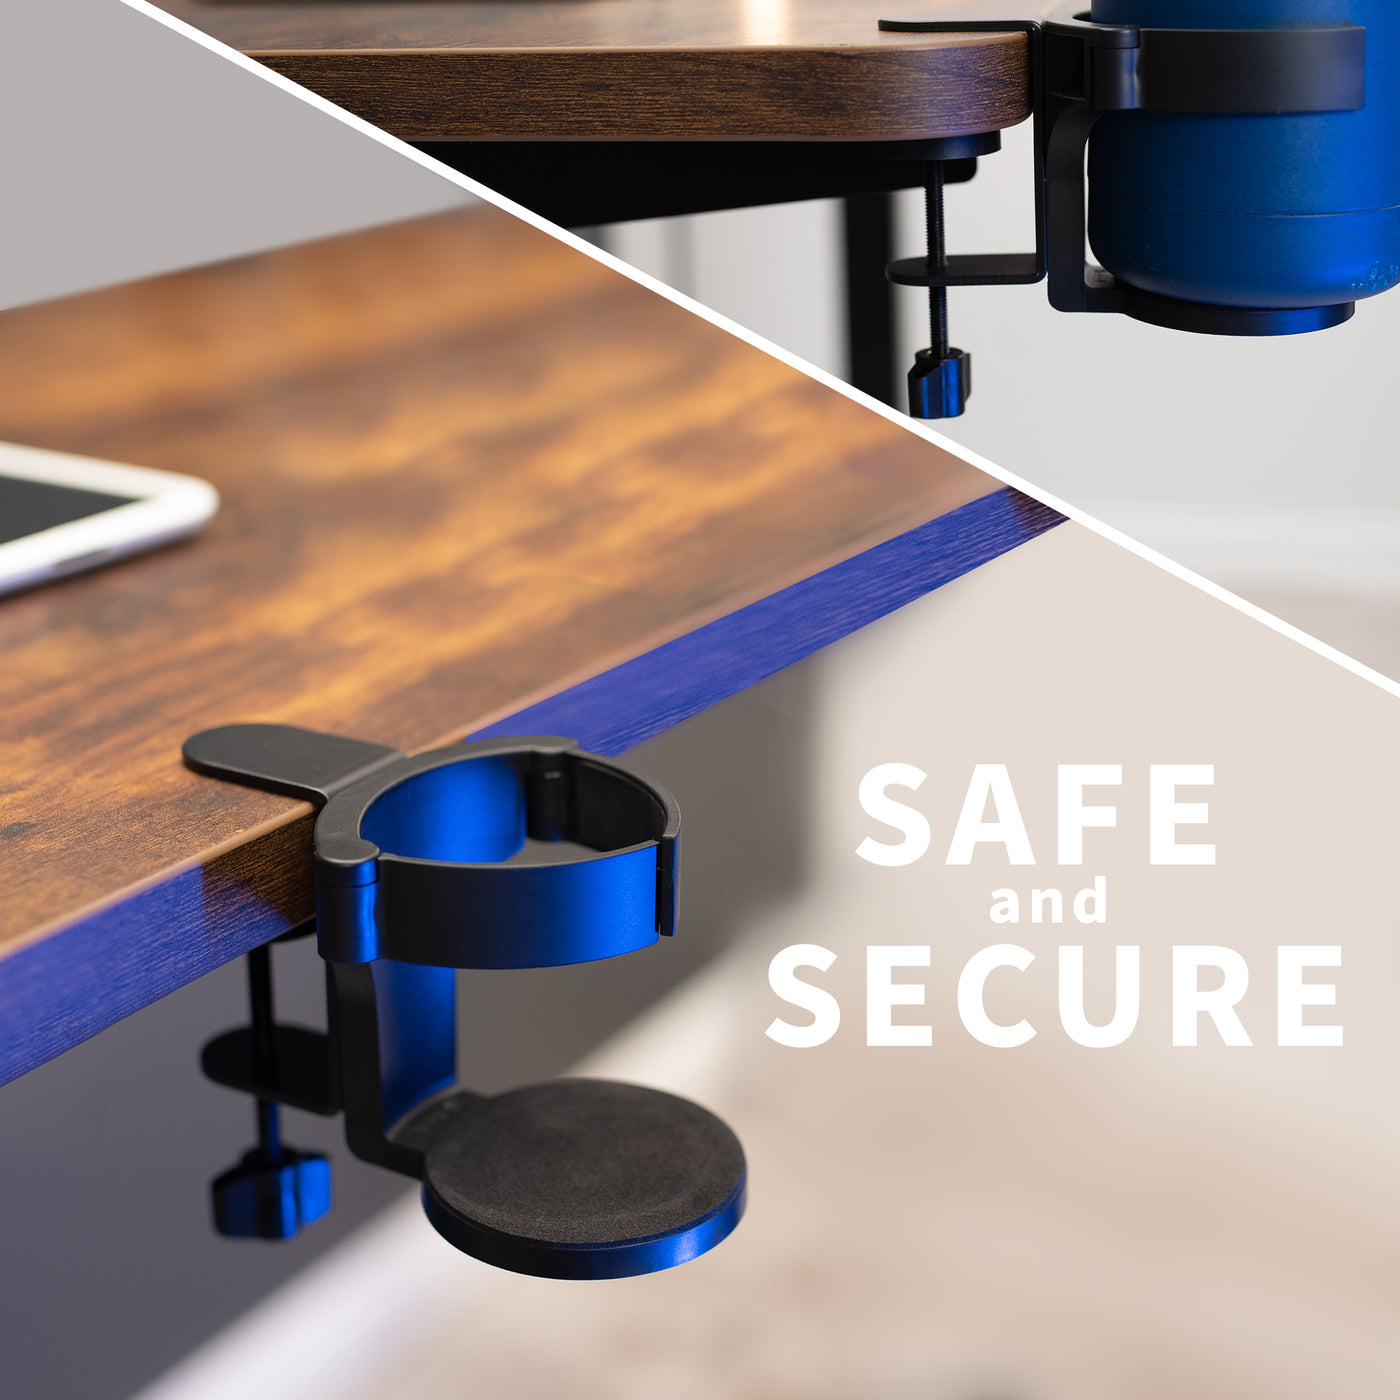 Minimize spills with safe and secure mounting while elevating drinks off whatever surface you choose.